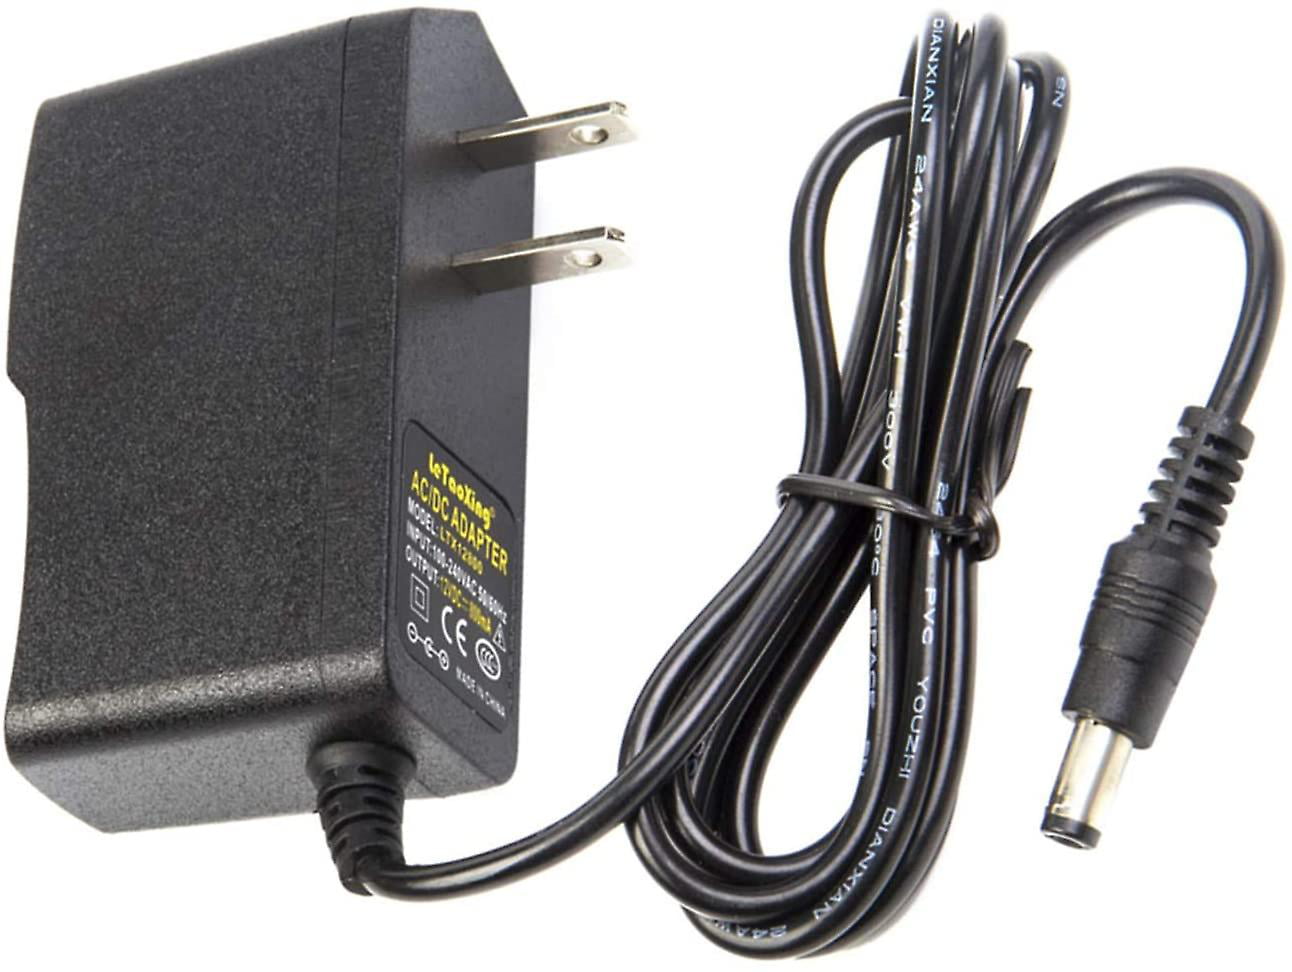 AC DC 12V 3.5A Power Supply Adapter 12 Volt 3.5 Amp 42W 5.5mm x 2.5mm Transformer 3500mA Charger 